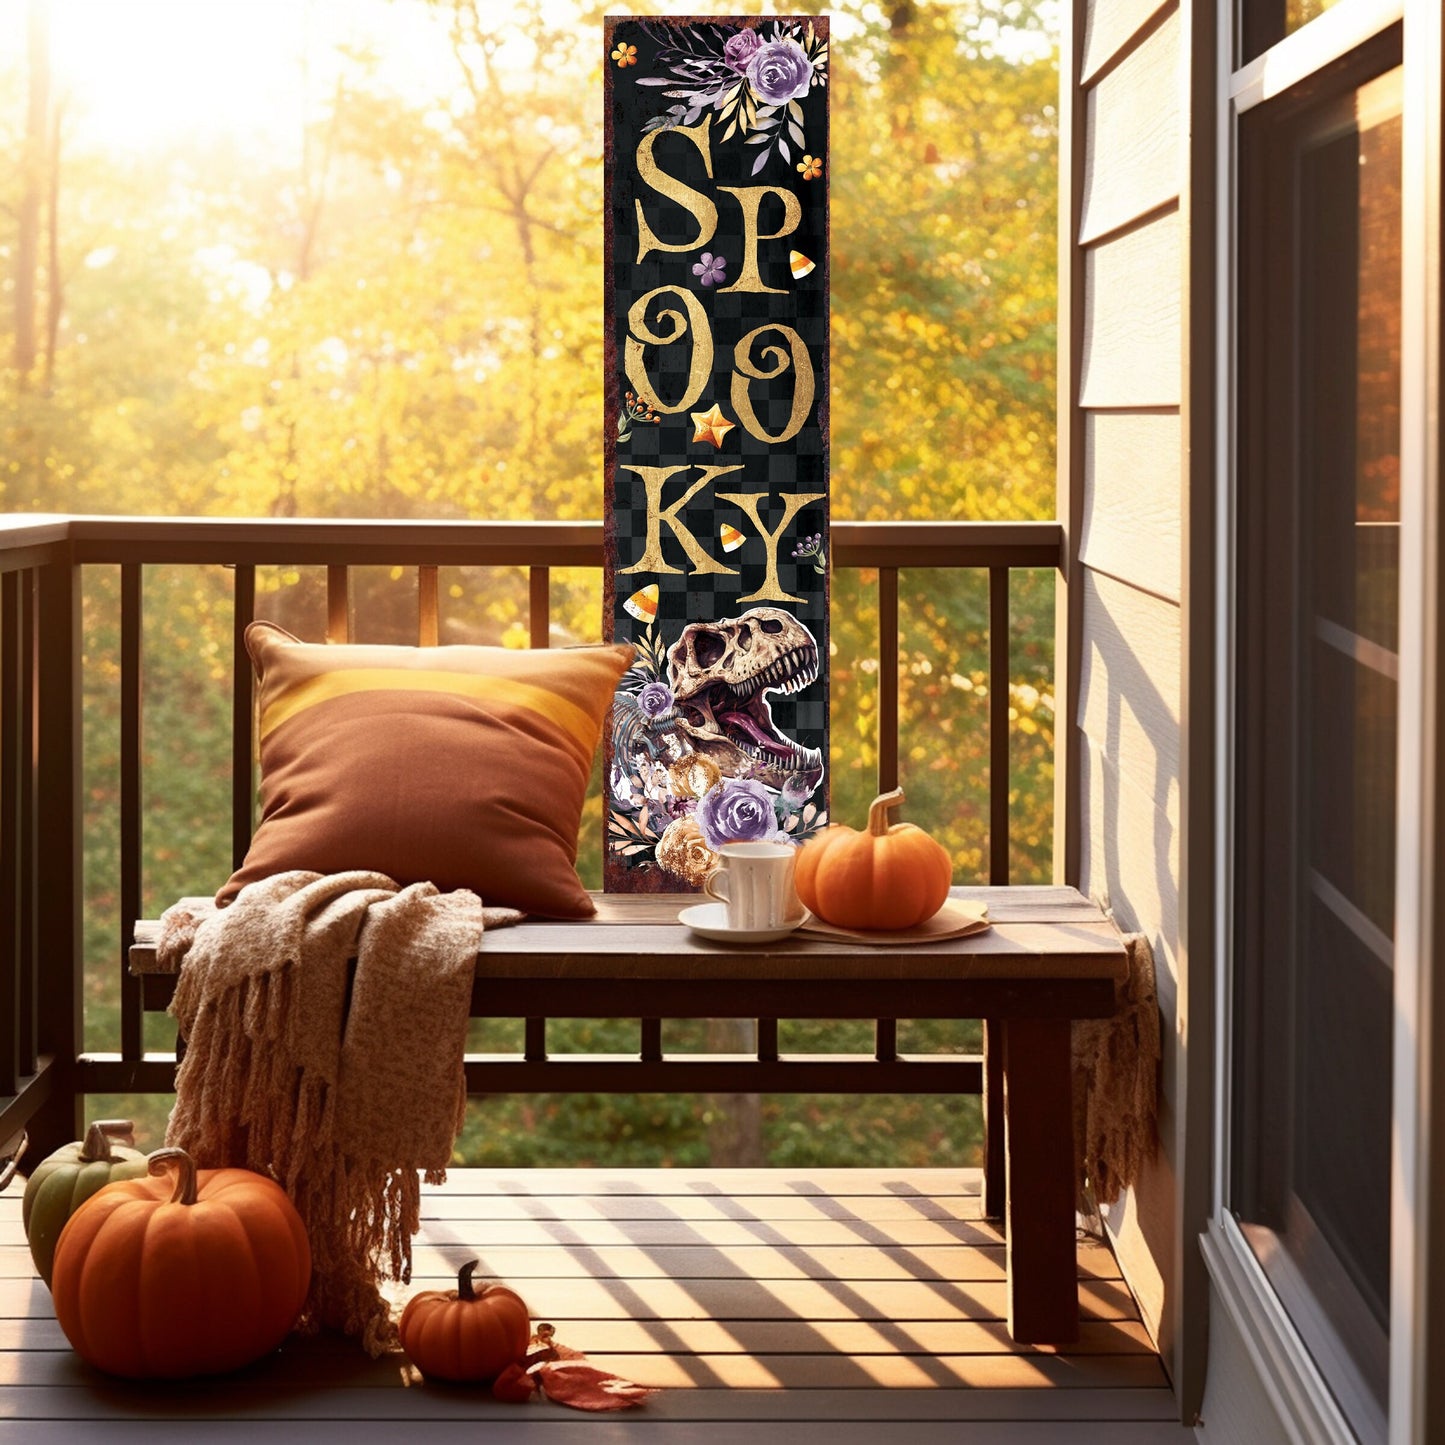 36in "Spooky" Halloween Porch Sign with Dinosaur Design - Front Porch Halloween Welcome Sign, Vintage Halloween Decoration,Modern Farmhouse